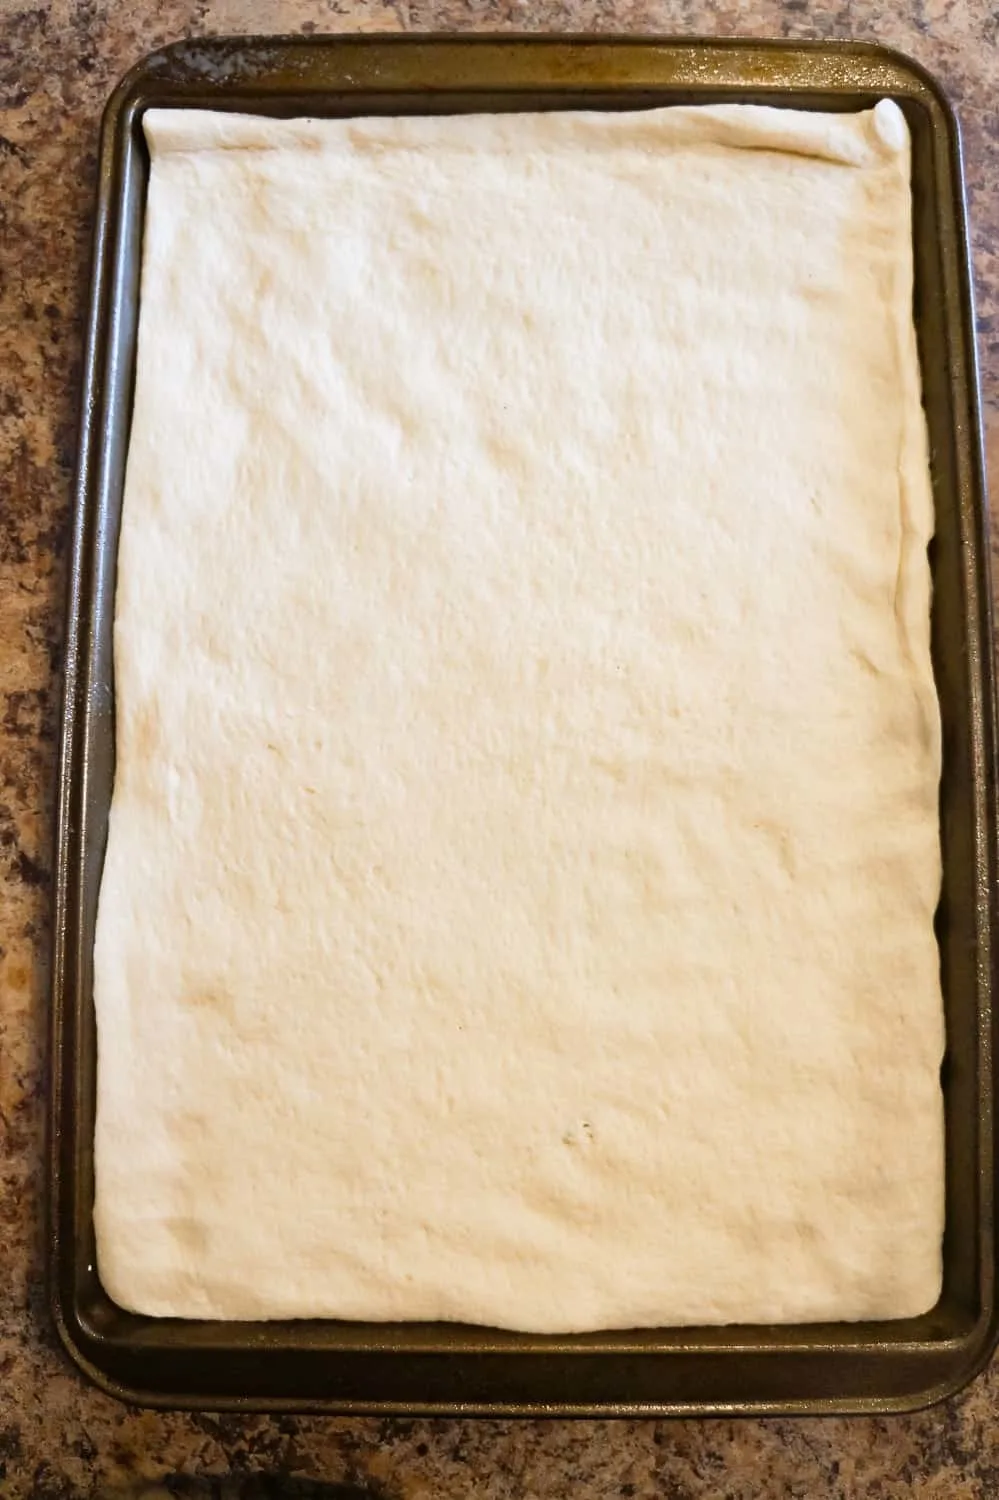 Pillsbury pizza crust pressed out on a baking sheet